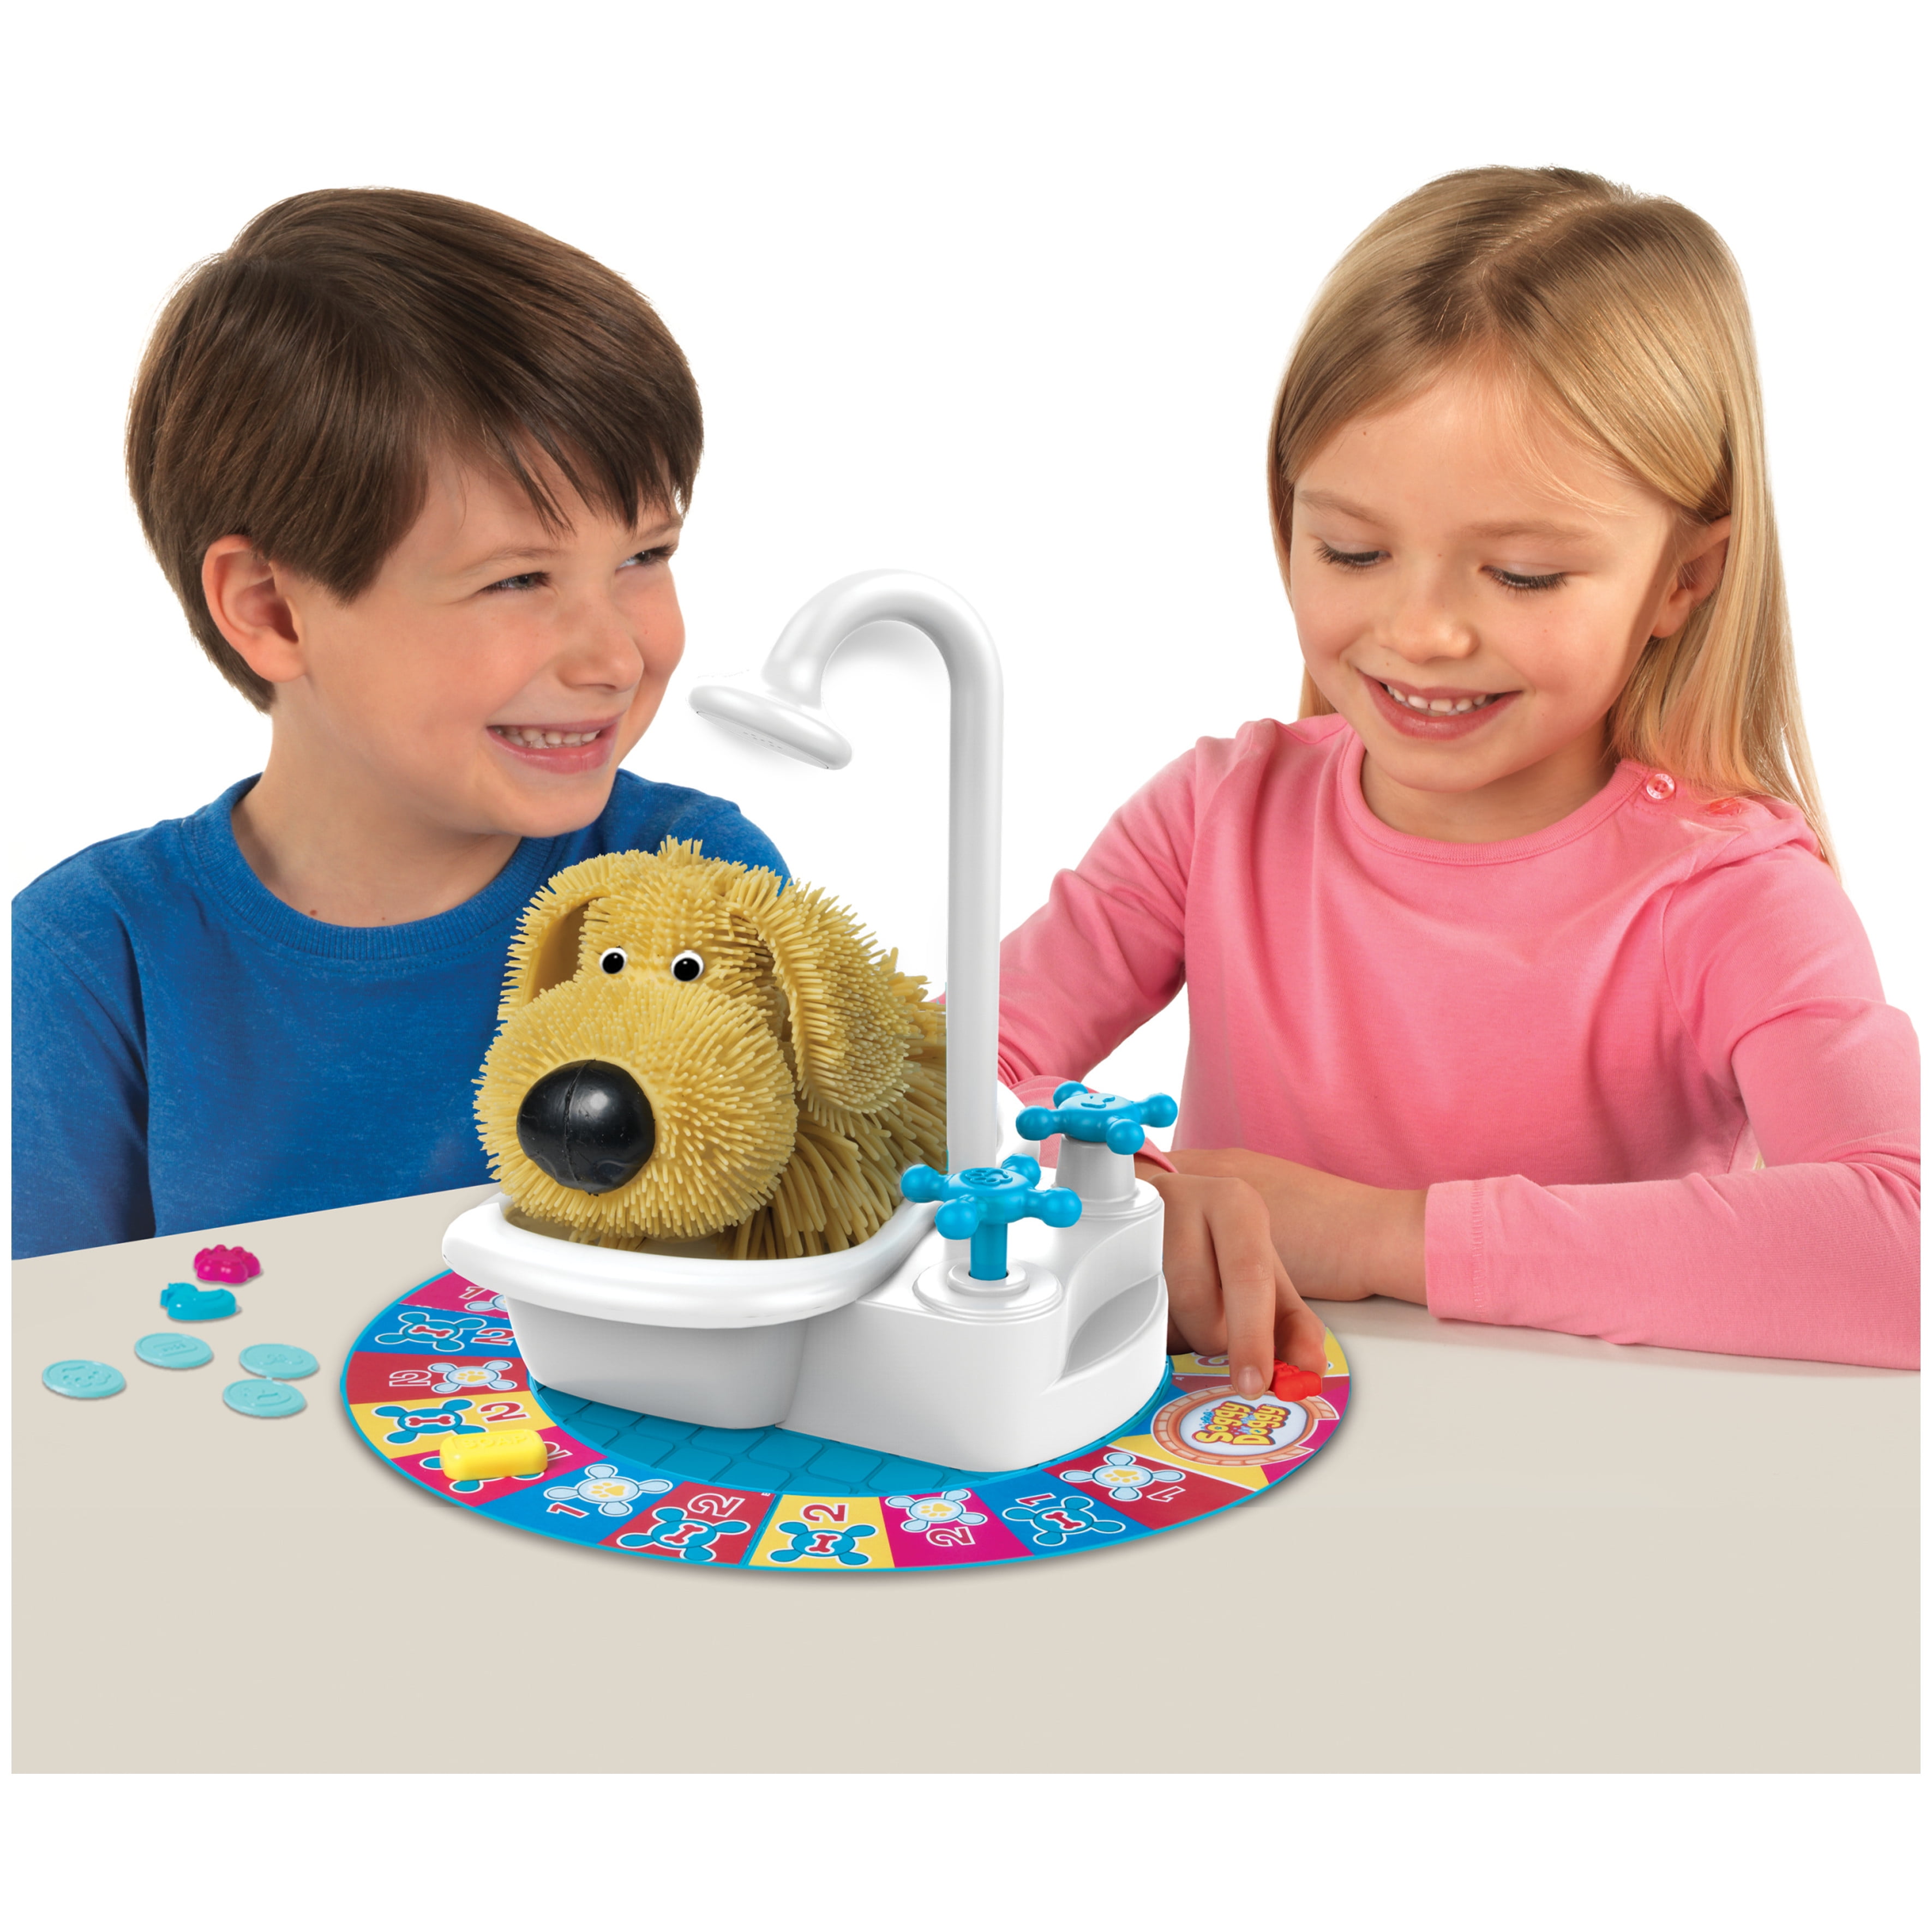 Soggy Doggy Preschool Game Review - Family Game Shelf